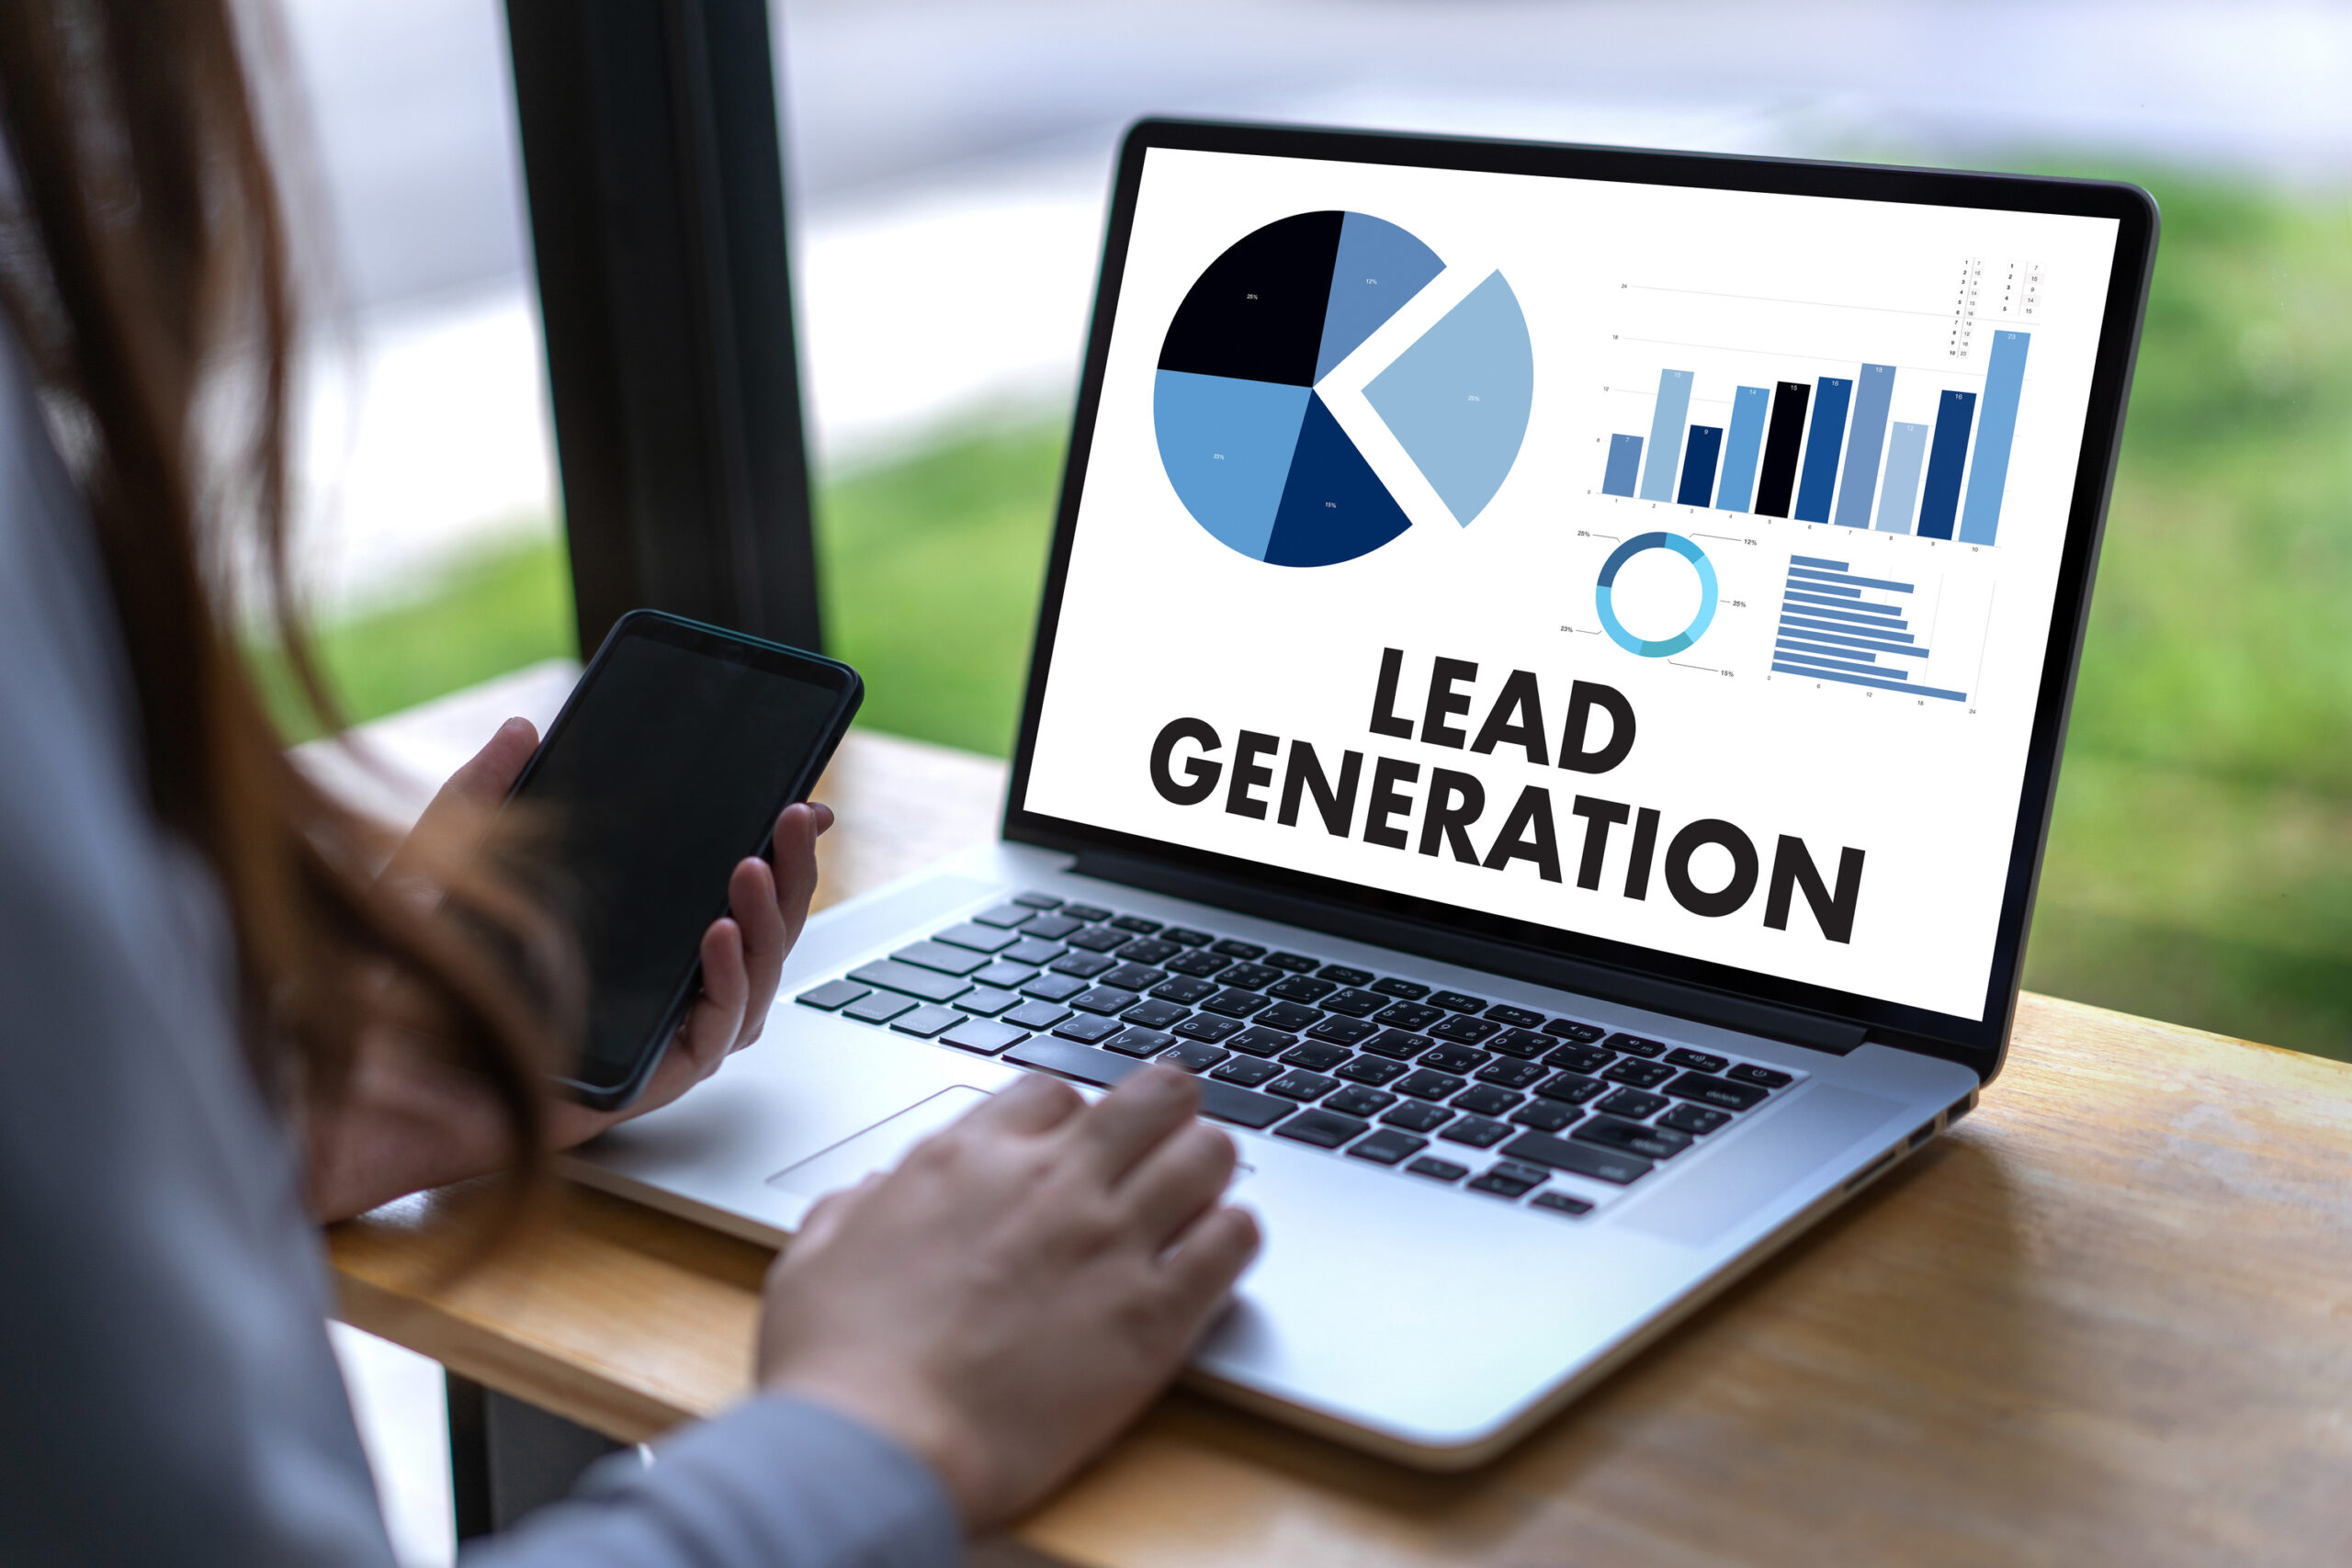 Lead Generation: Definition and Strategies